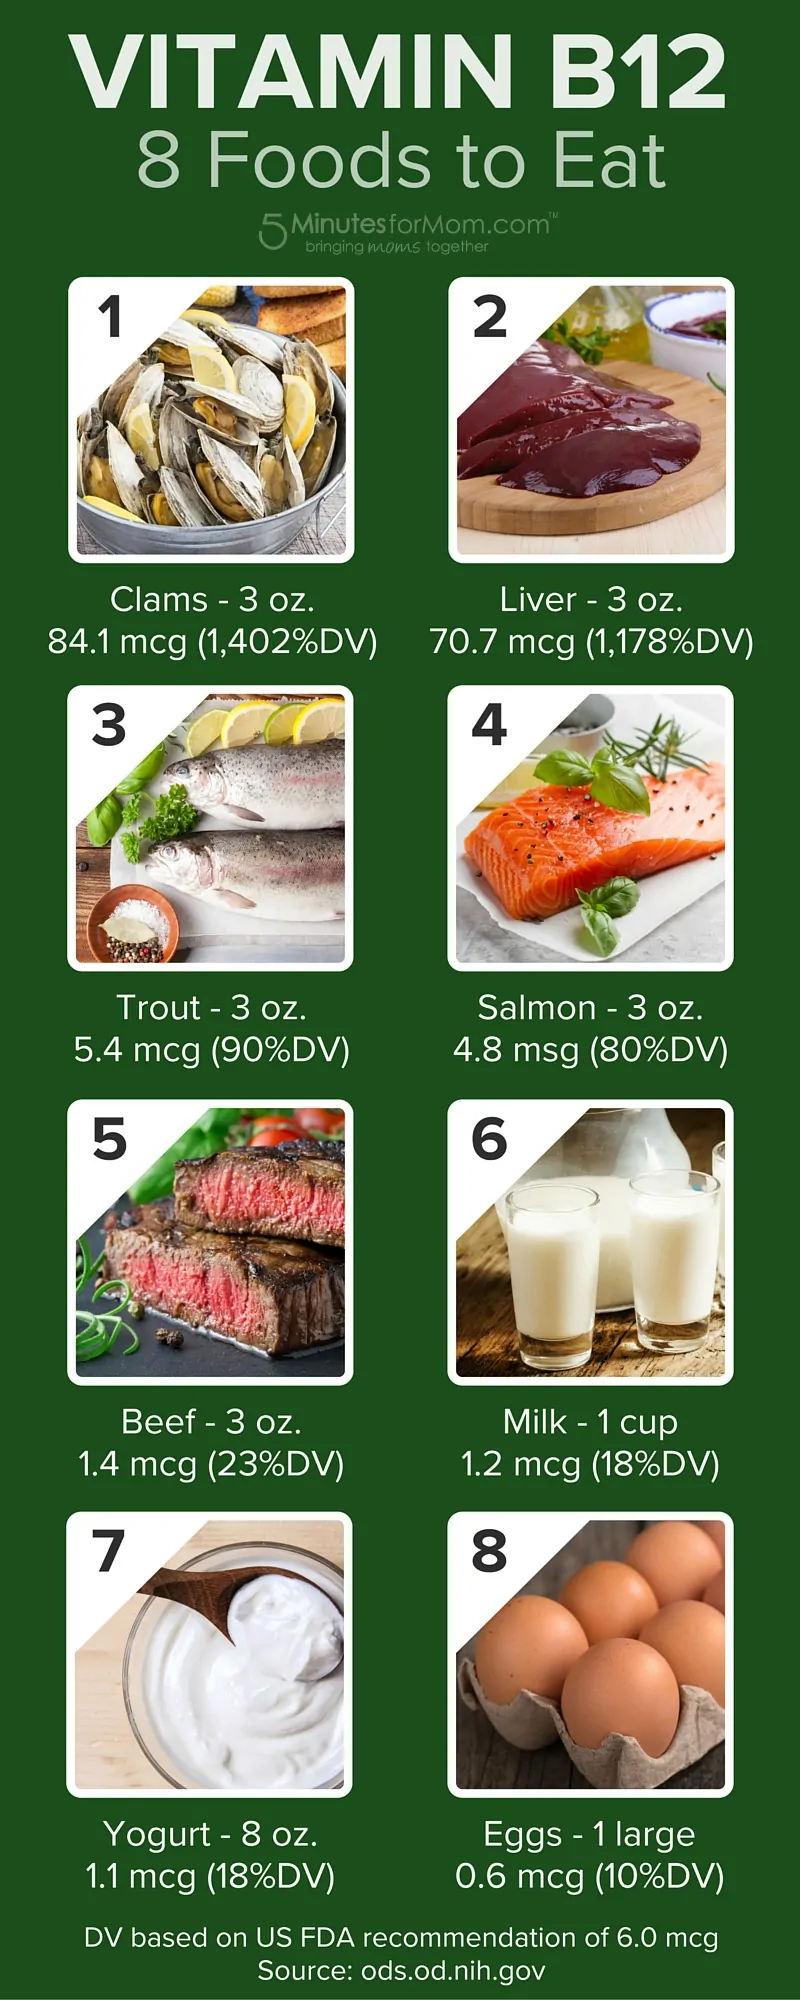 Vitamin B12 - 8 Foods to eat to get vitamin B12